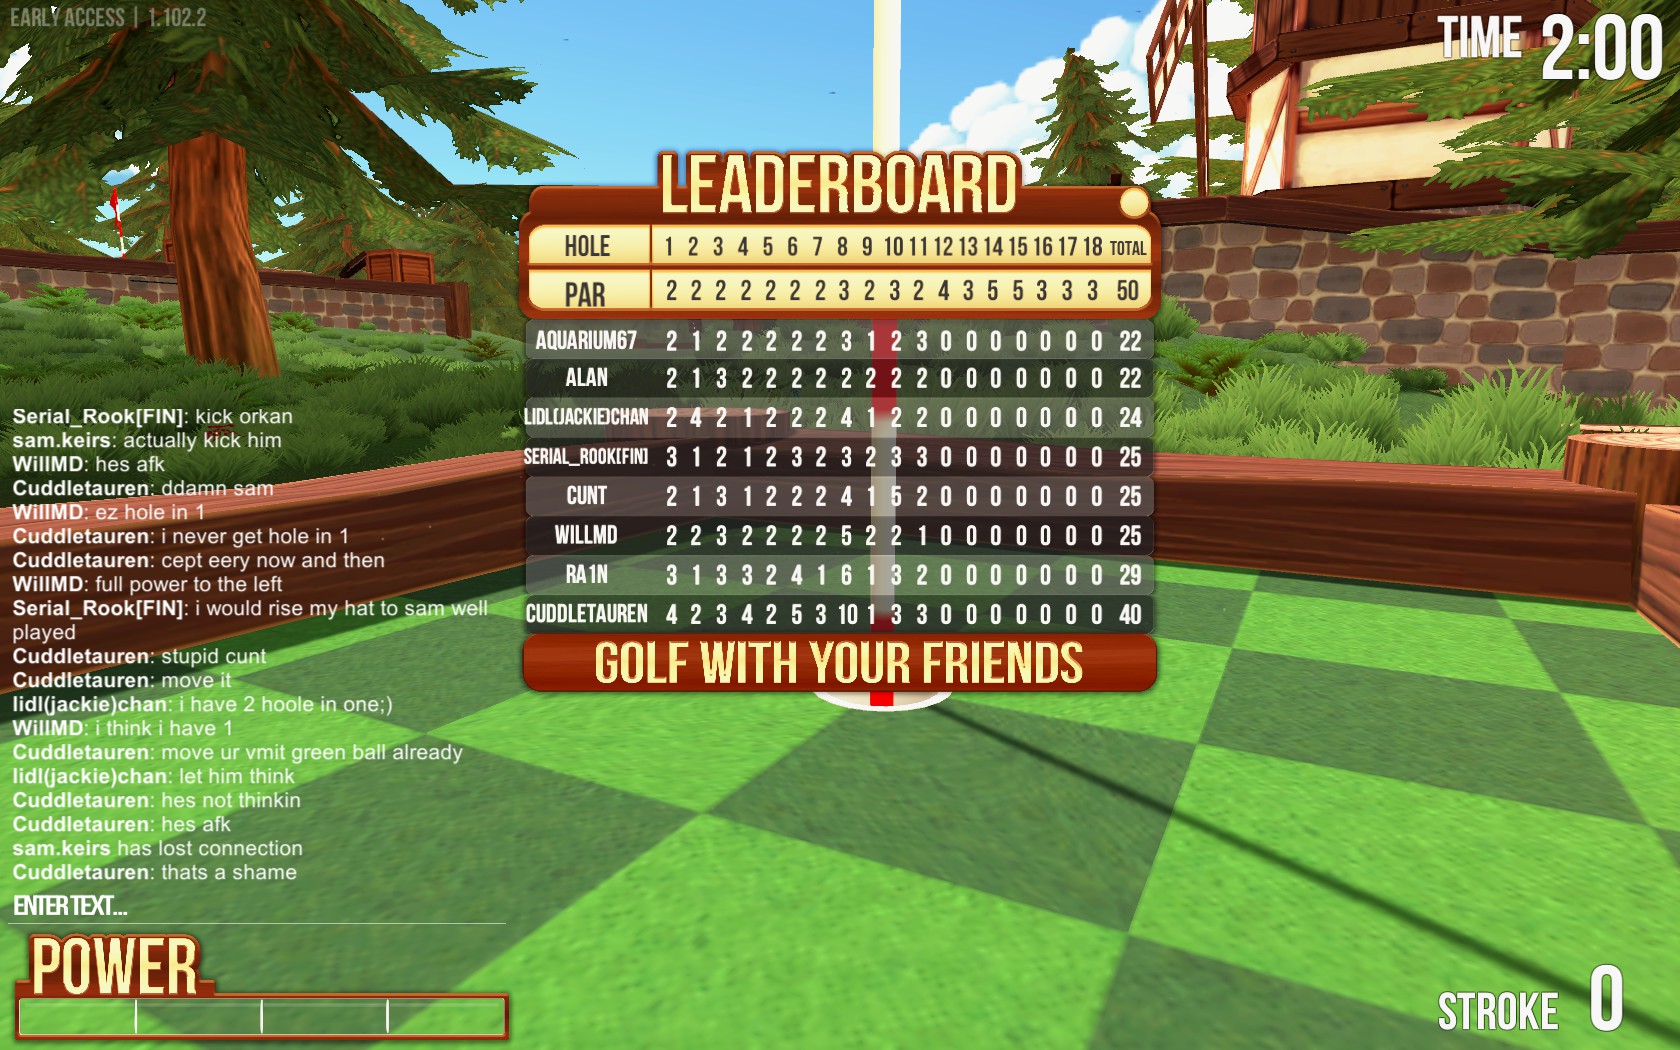 download free golf it with friends